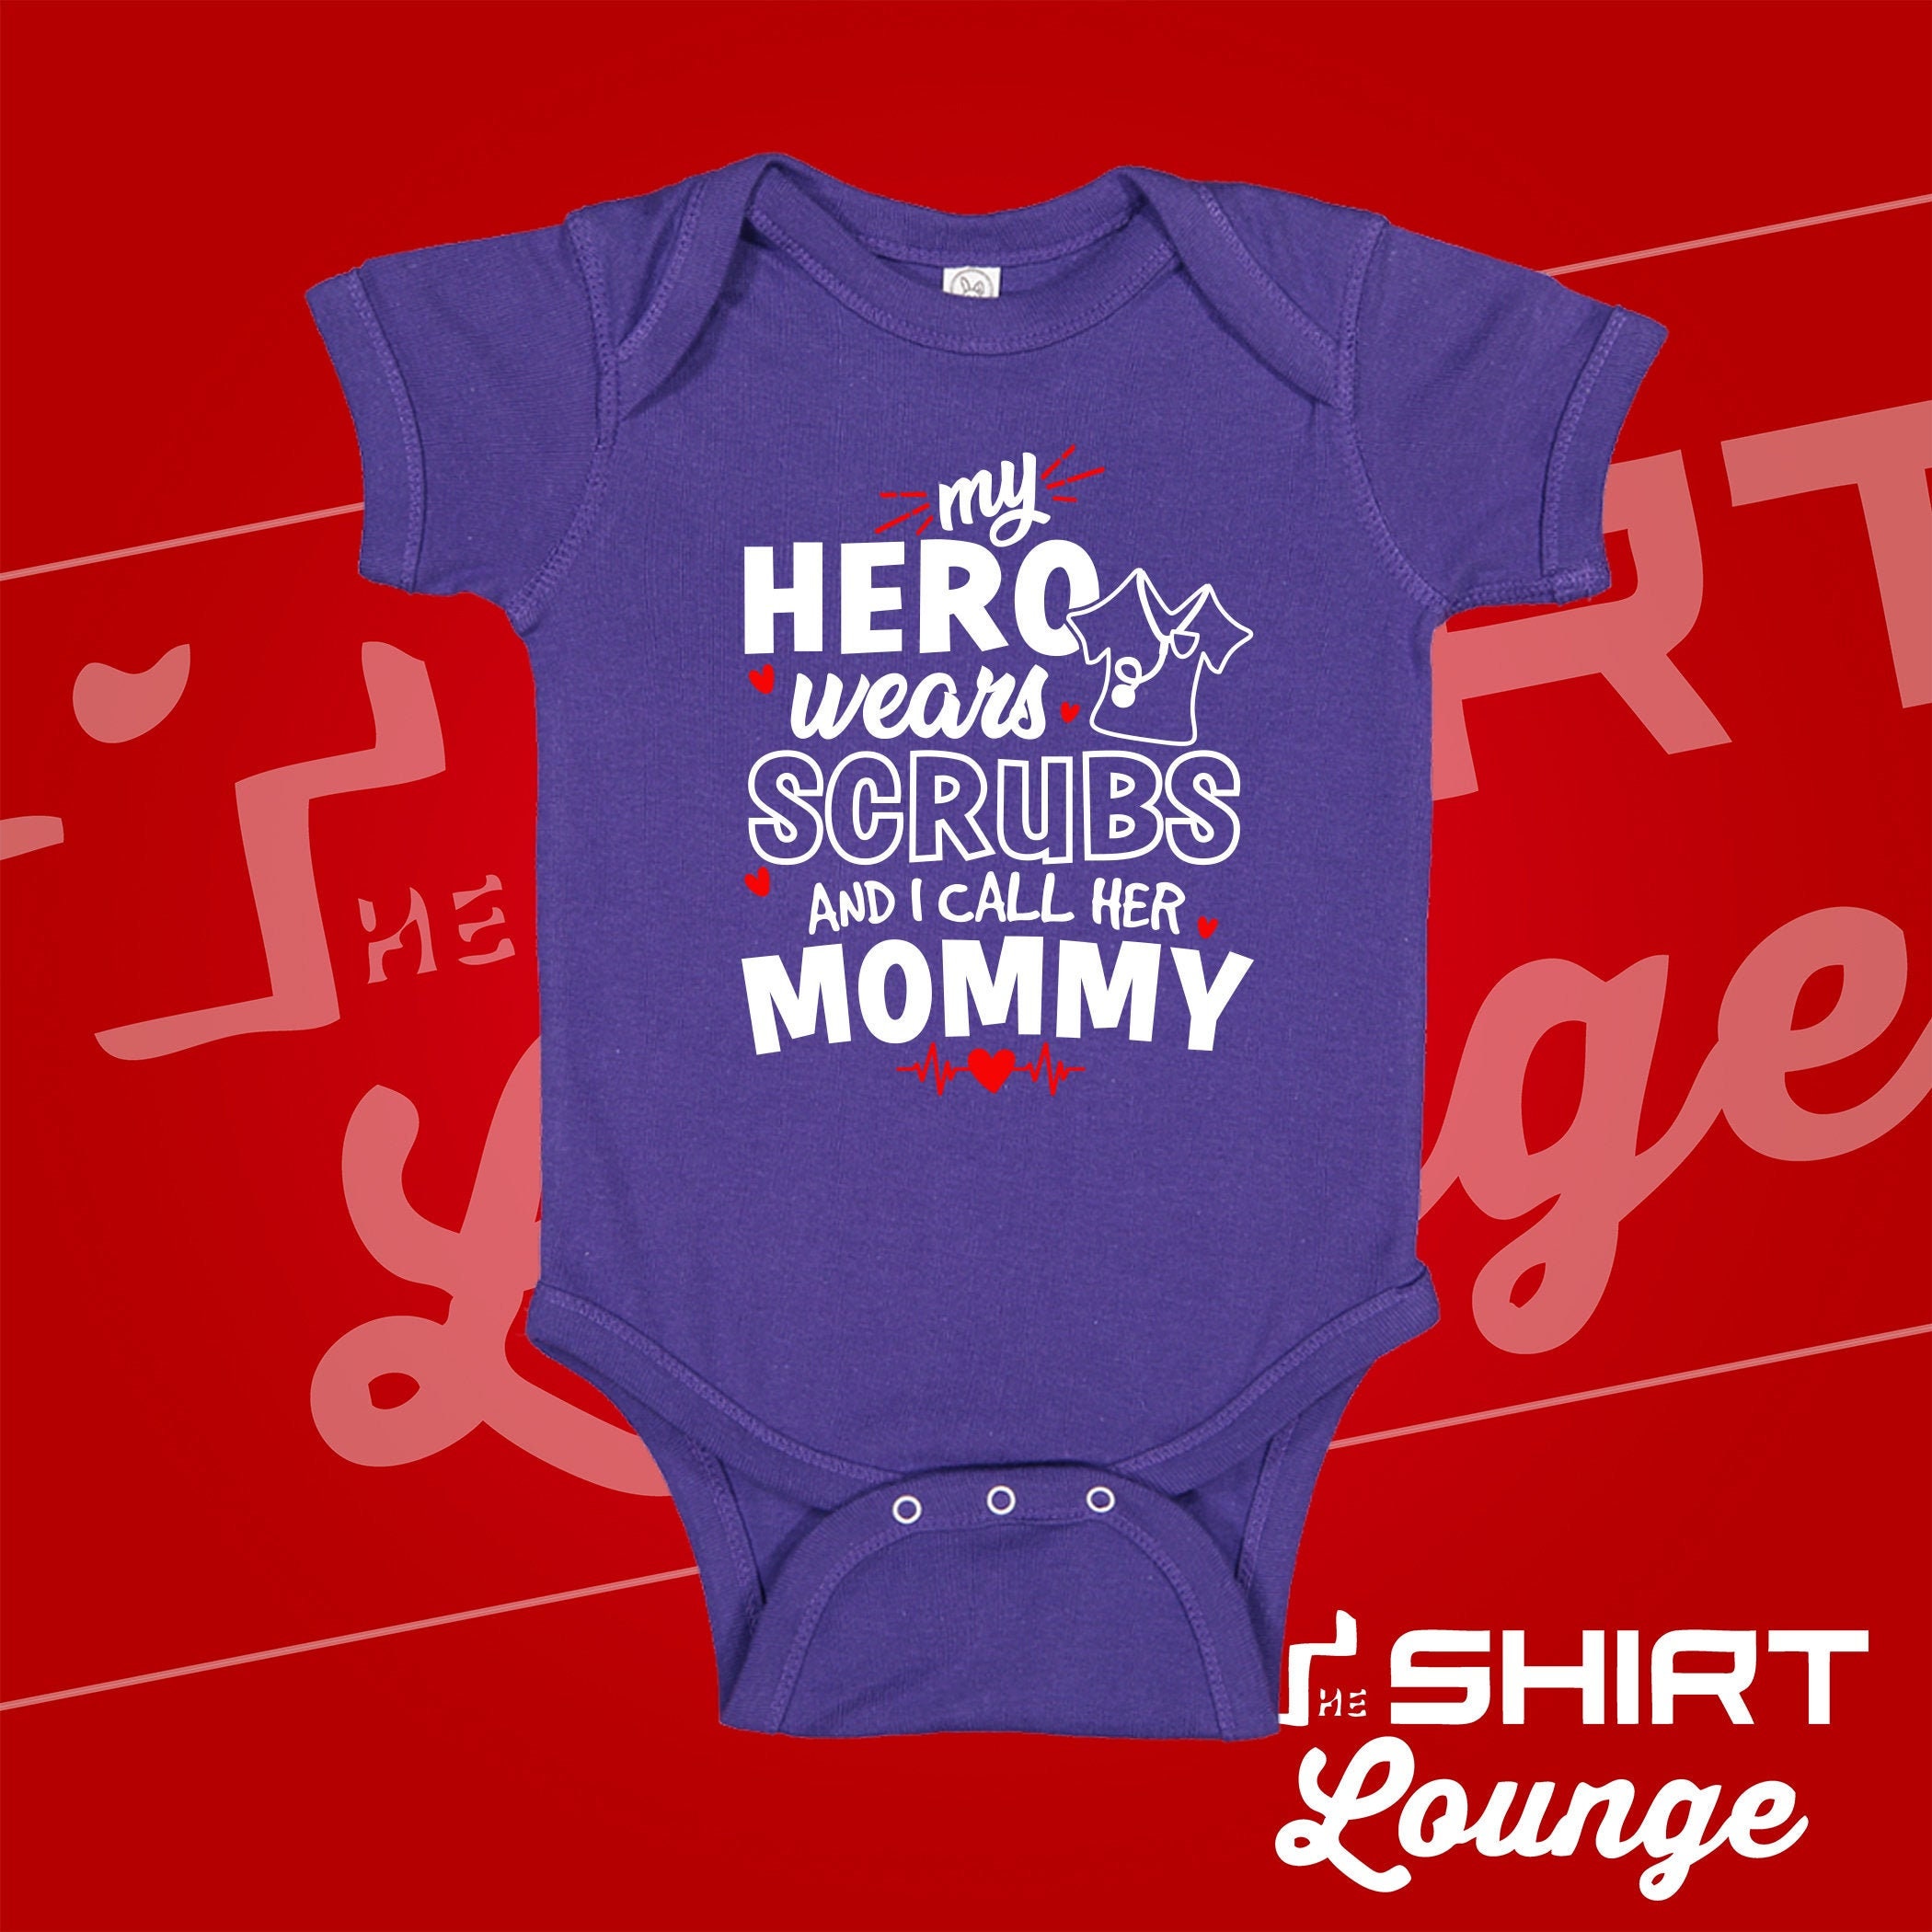 My Hero Wears Scrubs and I Call Her Mommy Cute Baby Bodysuit/toddler  T-shirt for Nurse Mom Baby Shower Gift Idea Clothing Clothes -  Canada